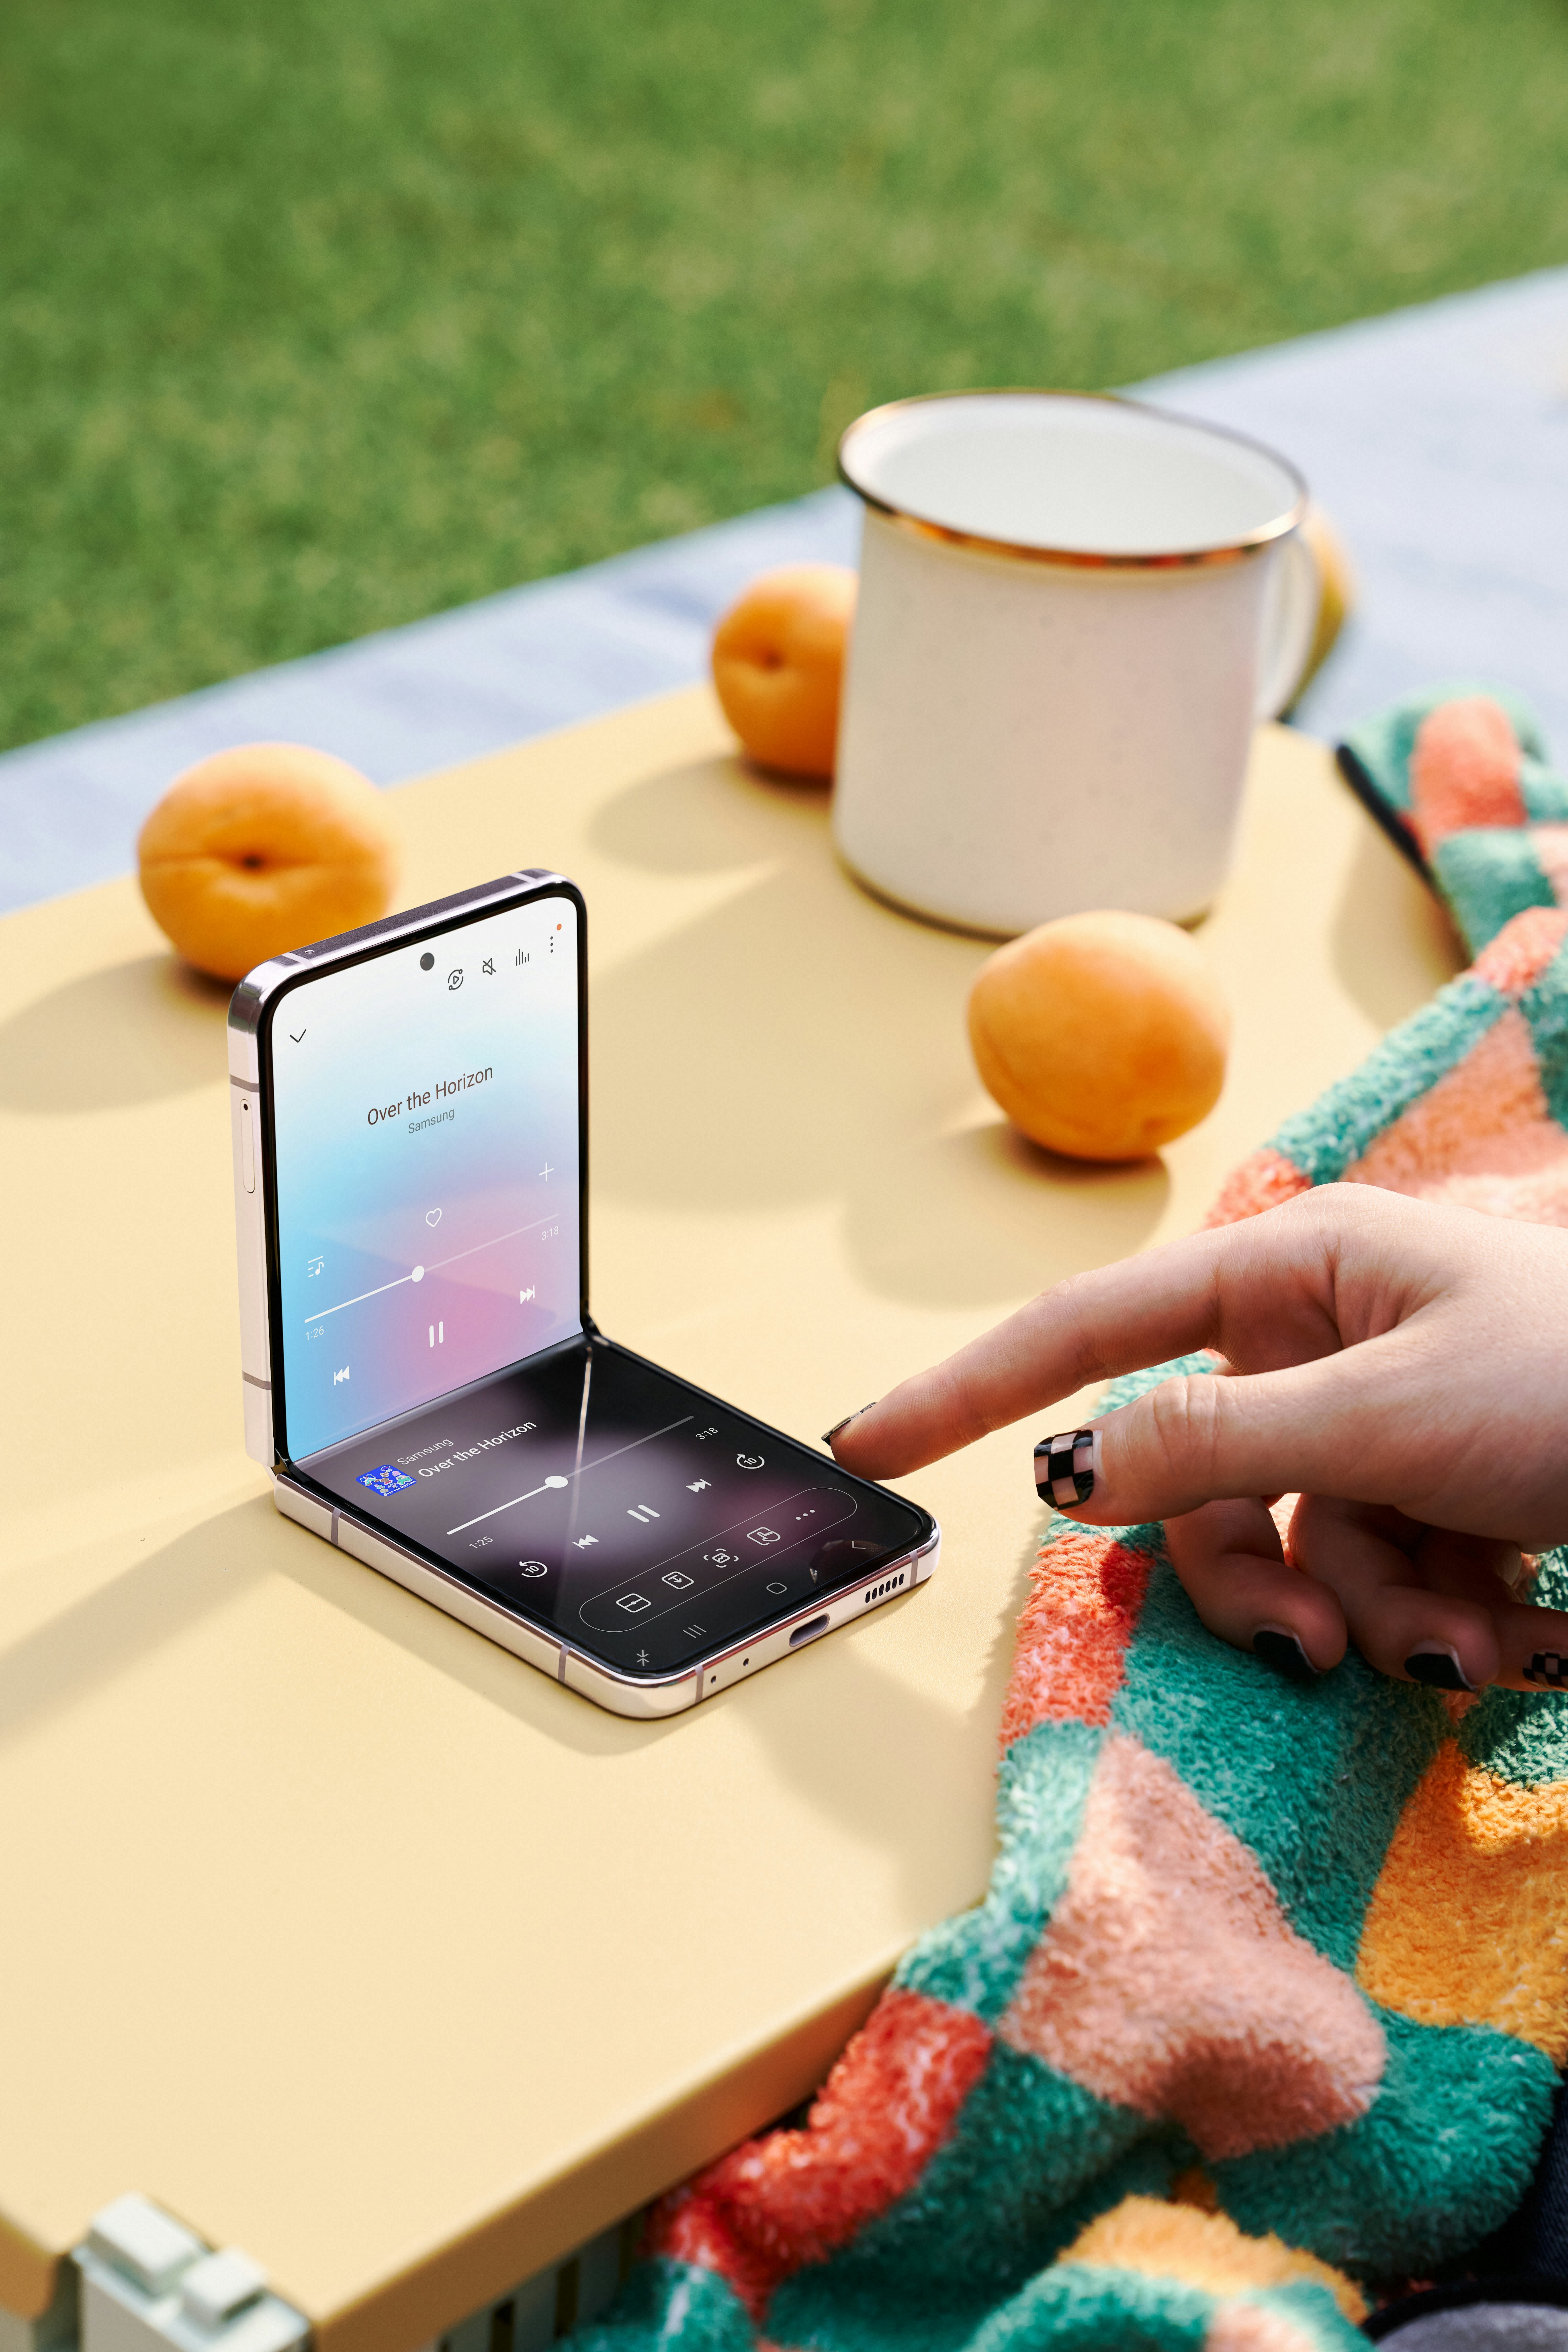 Samsung's Galaxy Z Fold 5 gets upgraded chip, thinner body and